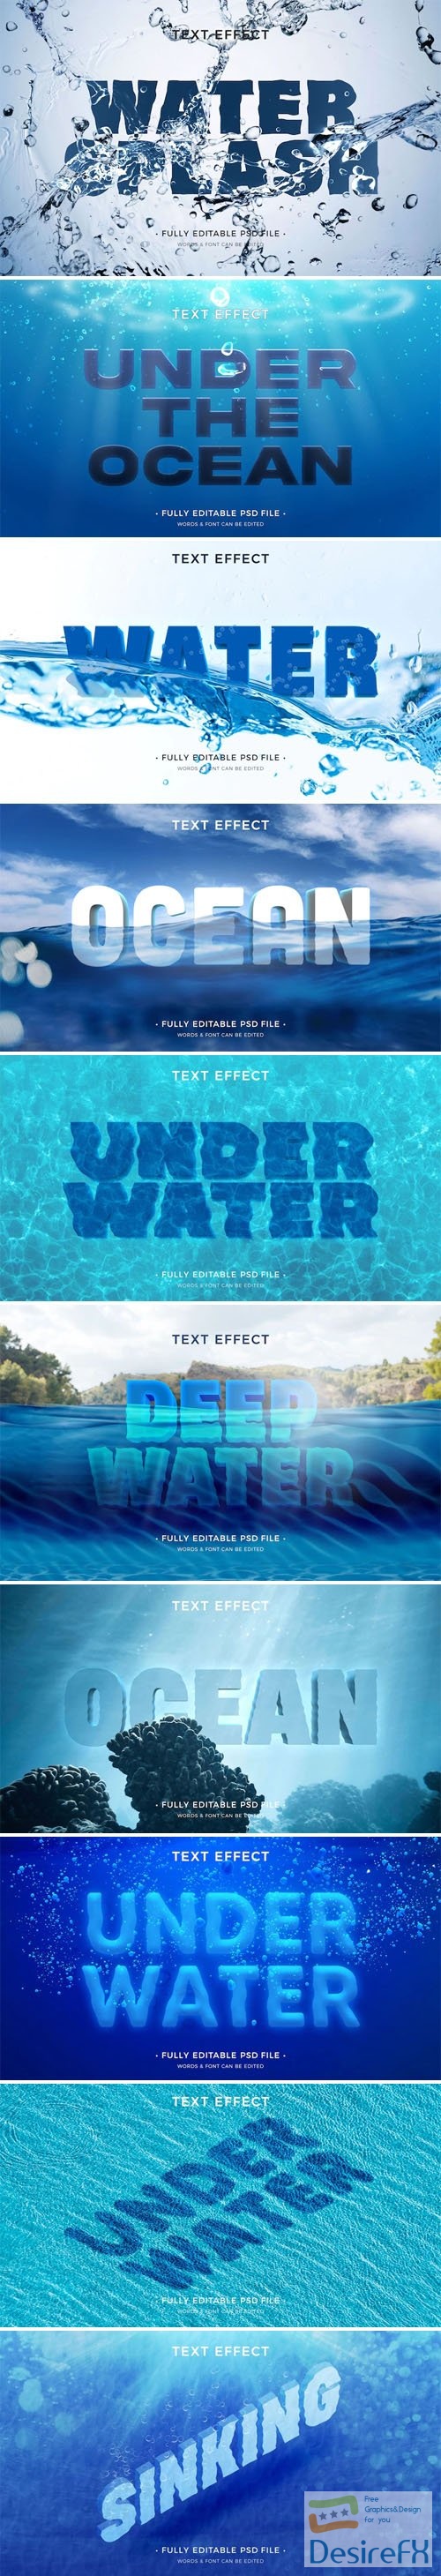 10 Creative Underwater Text Effects for Photoshop